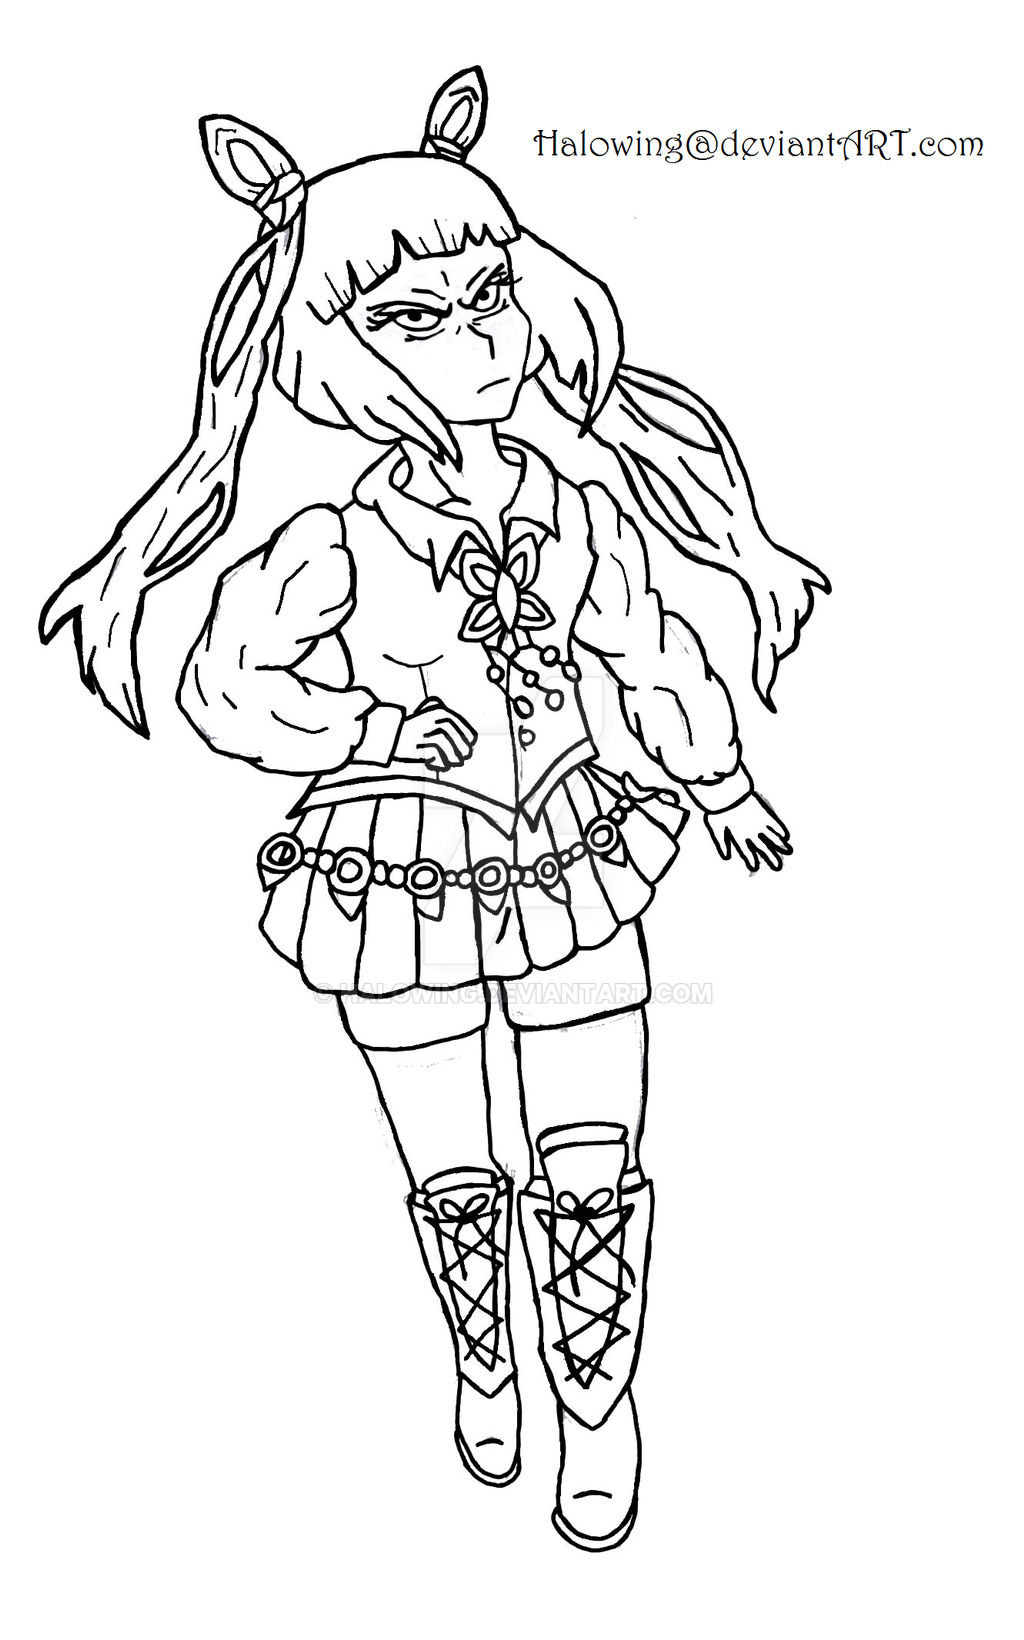 Cherry: Now its serious! (Line work)